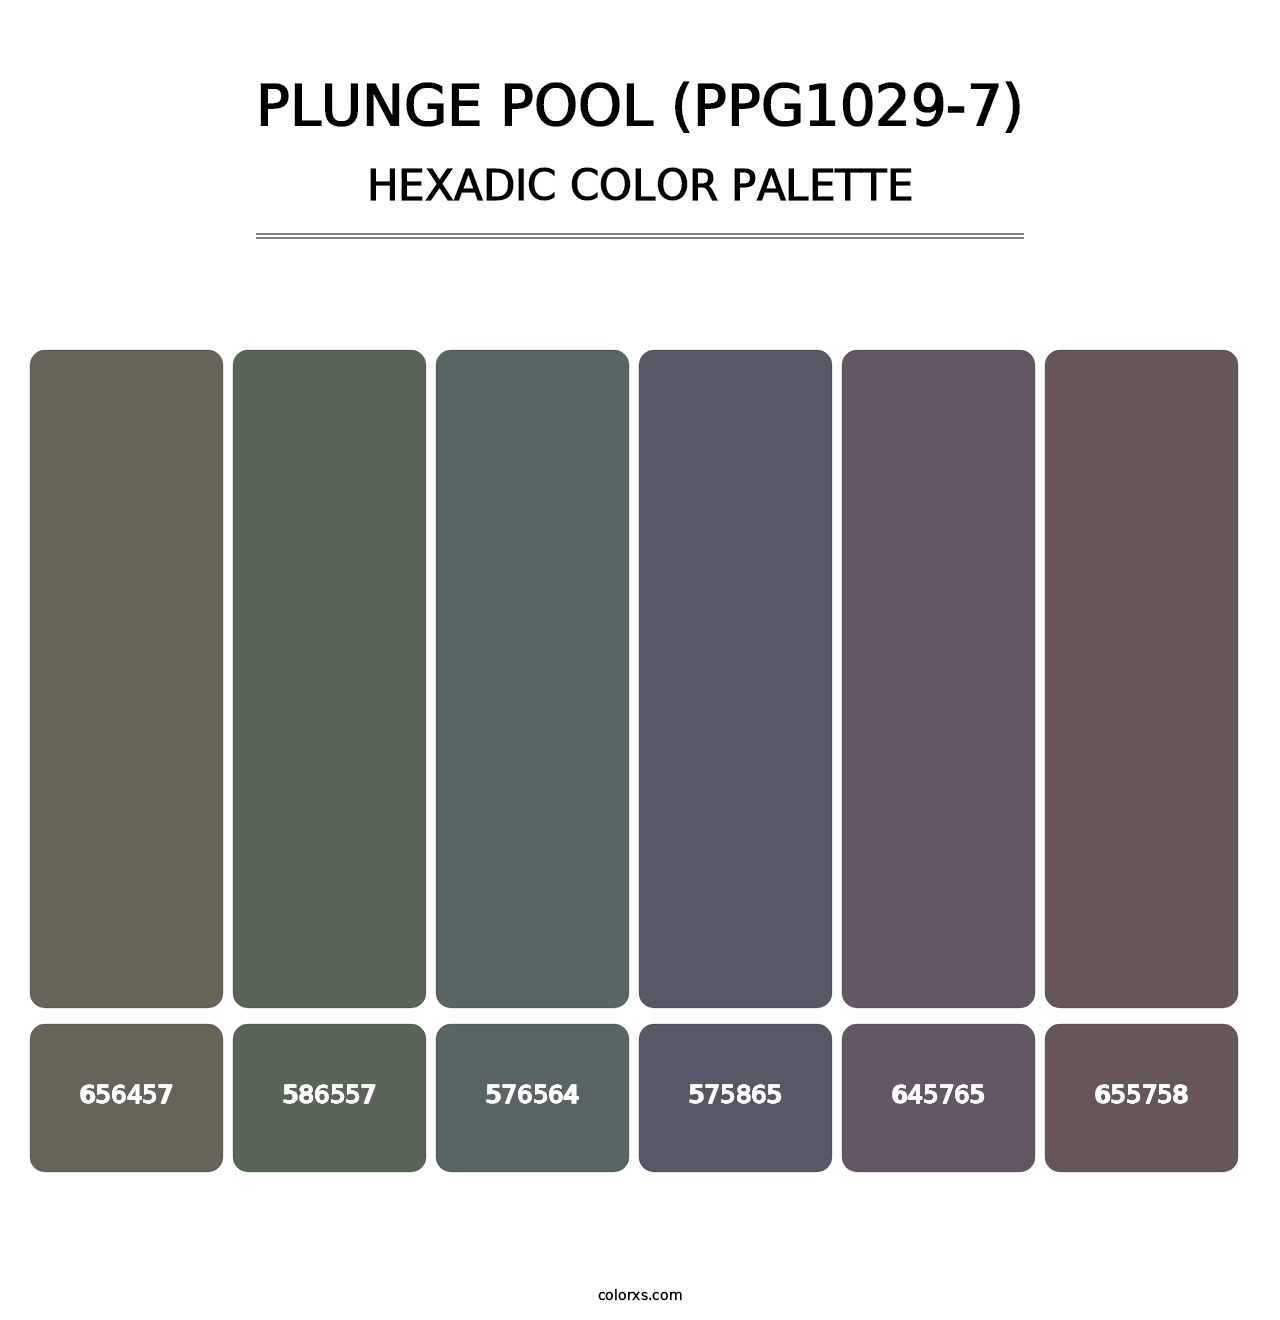 Plunge Pool (PPG1029-7) - Hexadic Color Palette